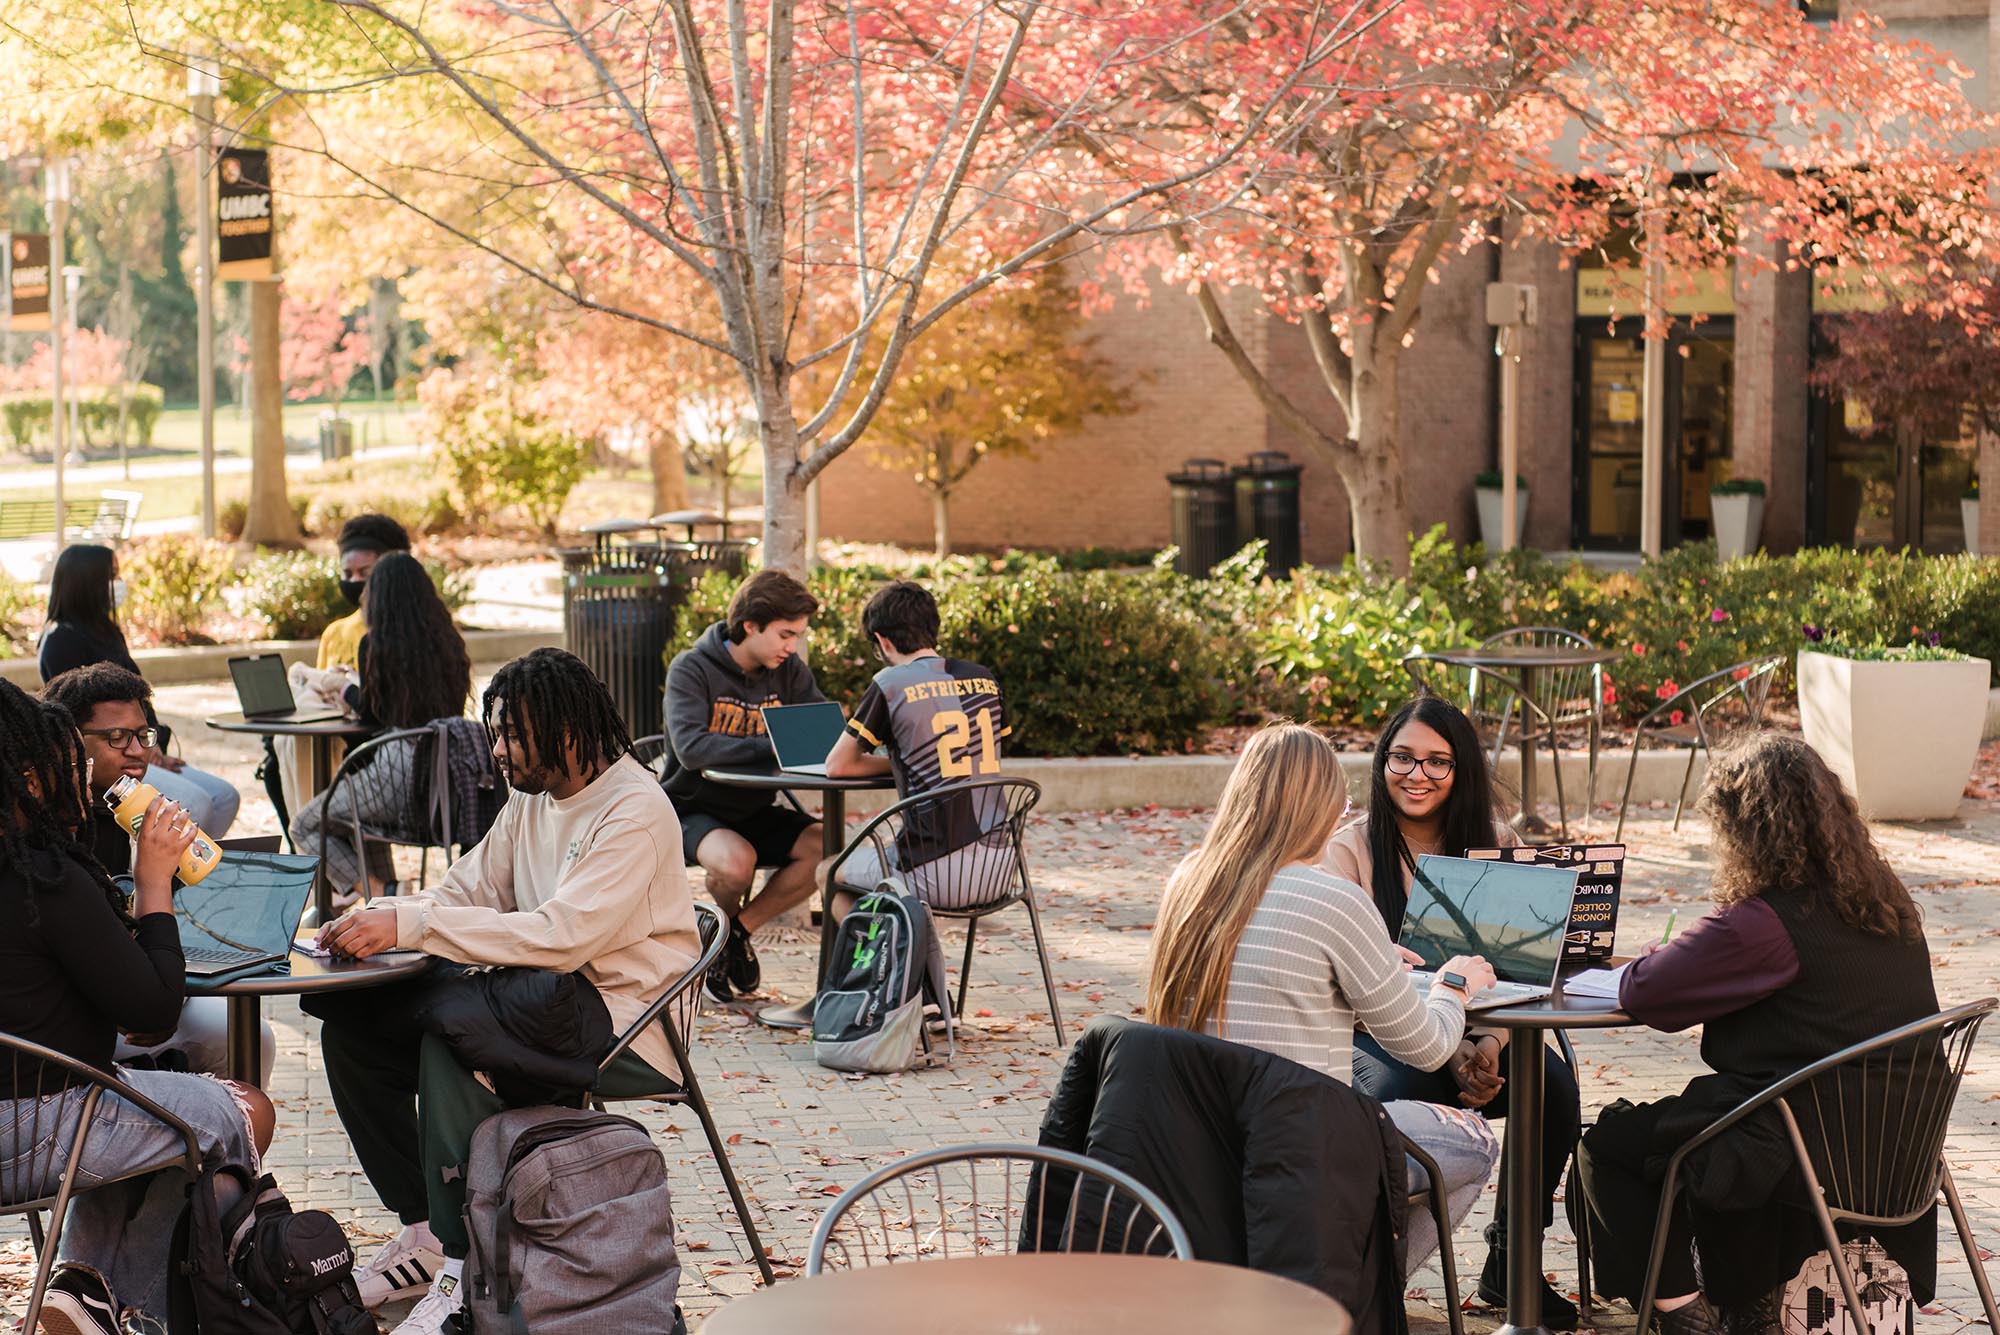 A diverse group of young students sit outside at different tables around the university center. Some students are working on their laptops, some are chatting and drinking water. Buildings and trees surround them in the background.